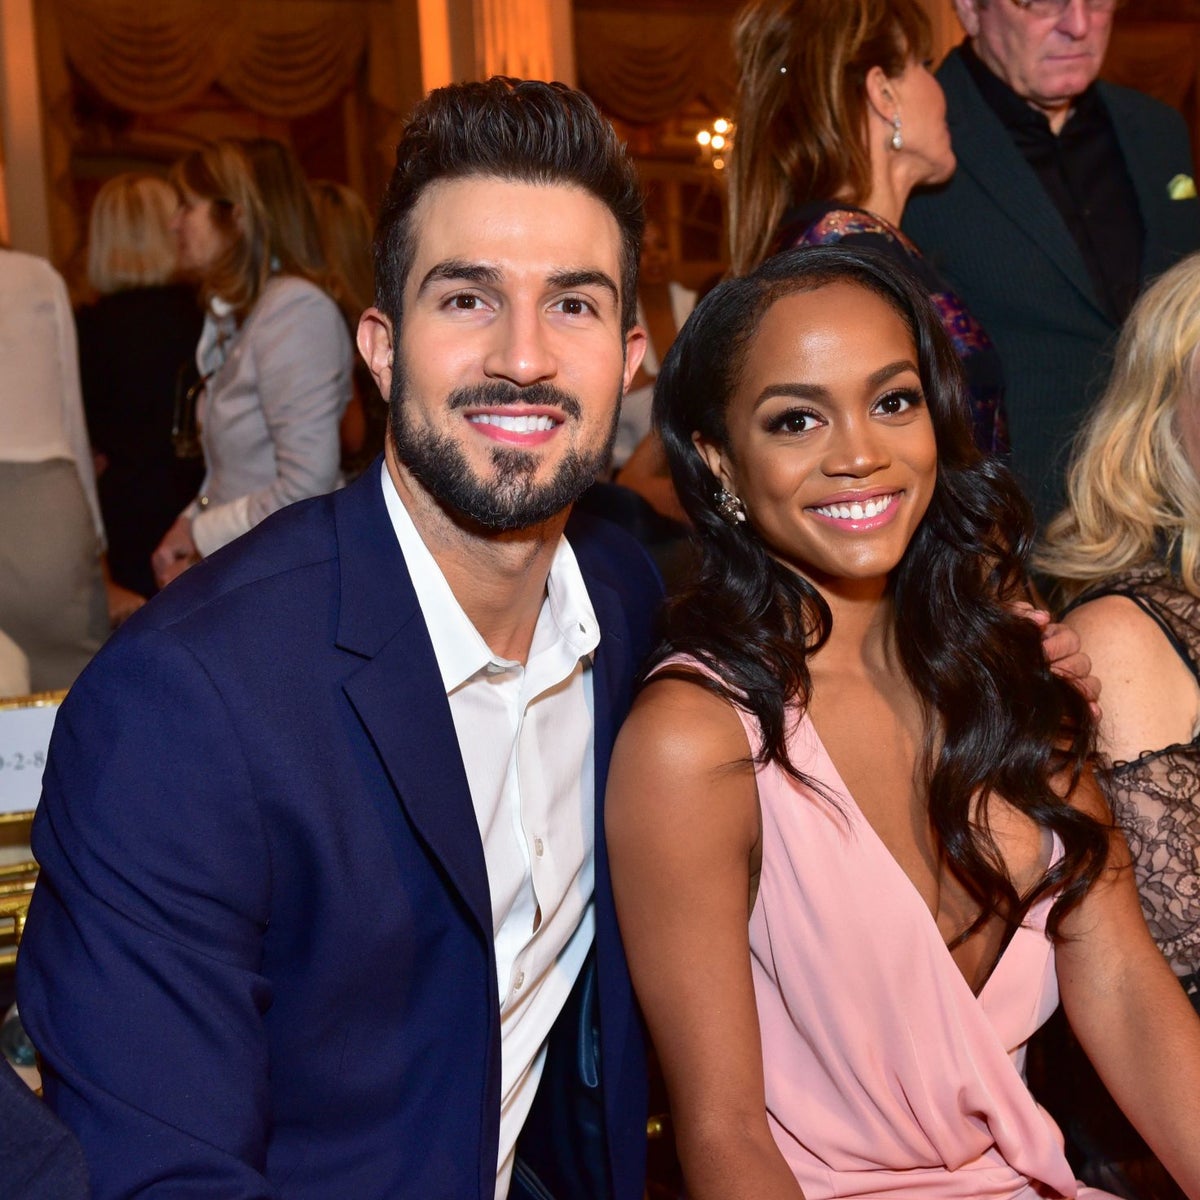 'The Bachelorette' Star Rachel Lindsay and Bryan Abasolo Are Married